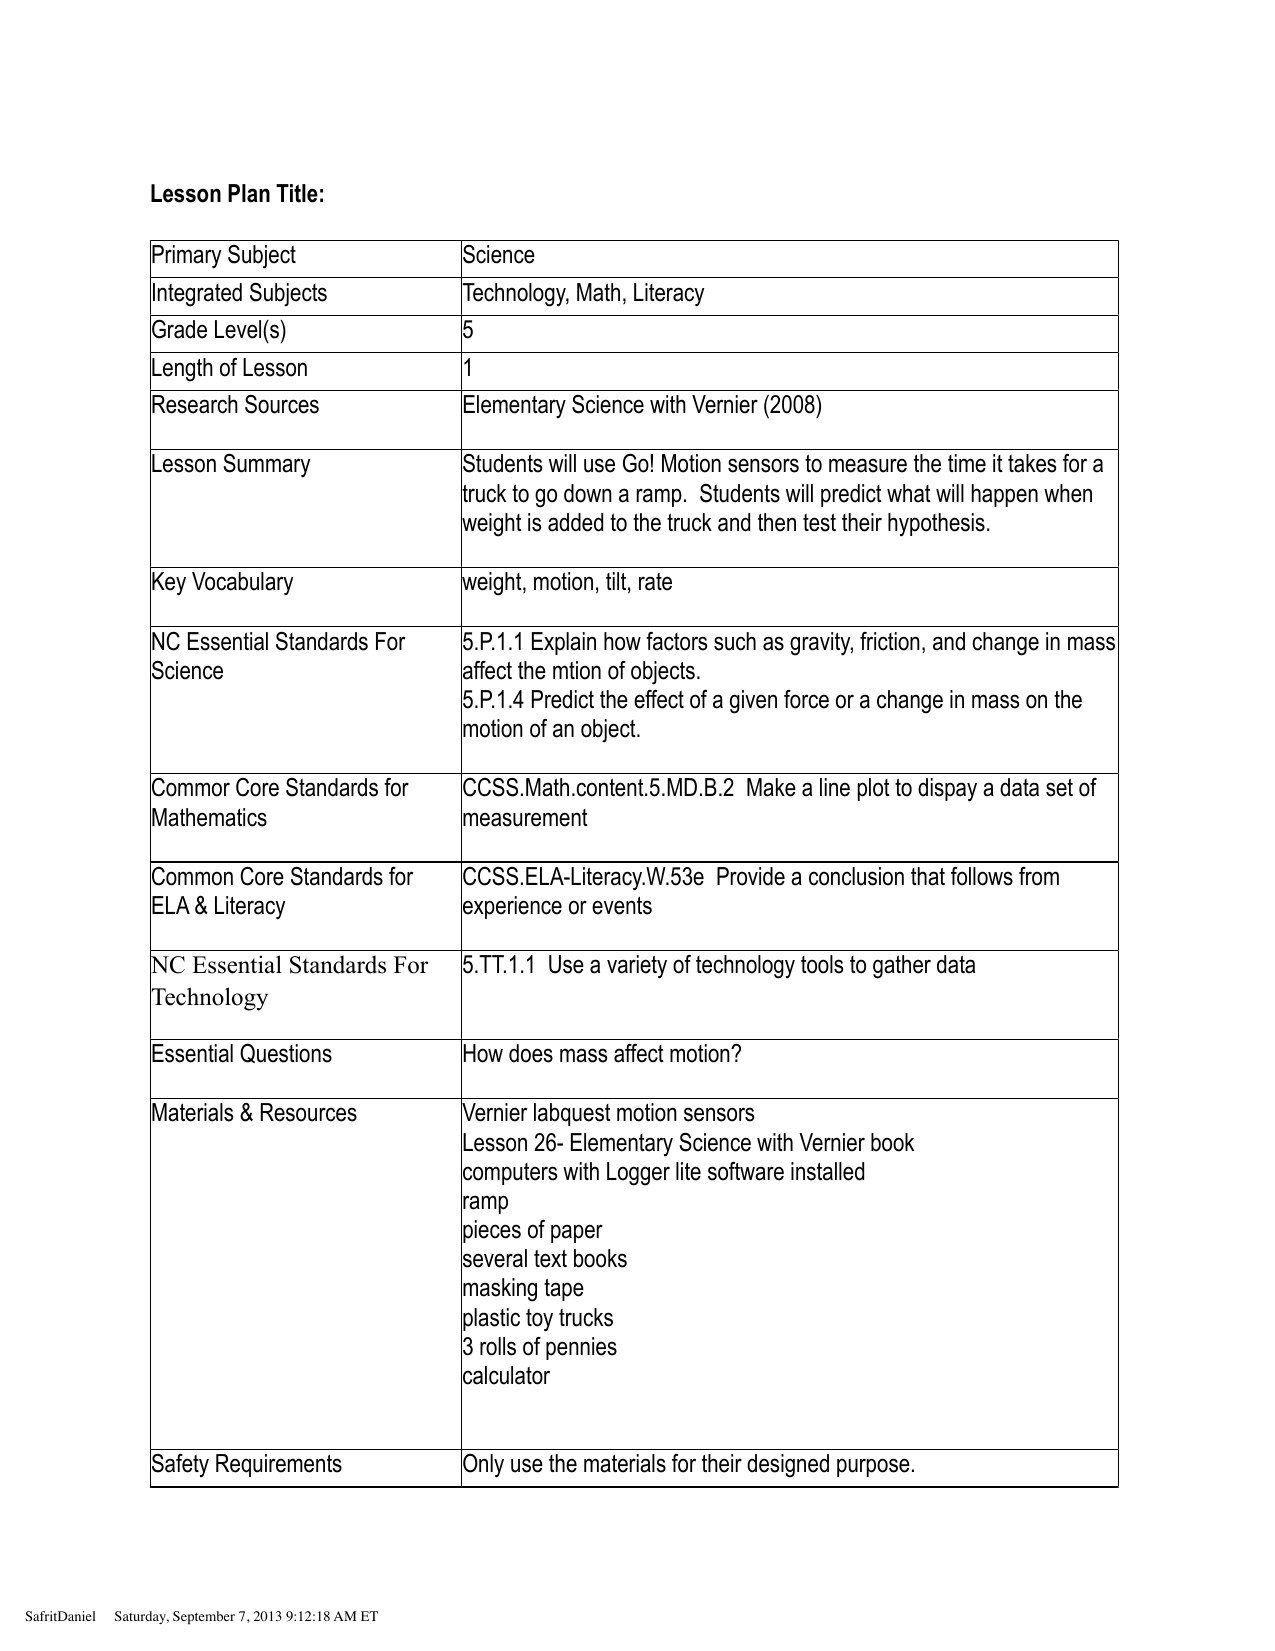 Elementary Science Lesson Plans Elementary Math Lesson Plans with Technology